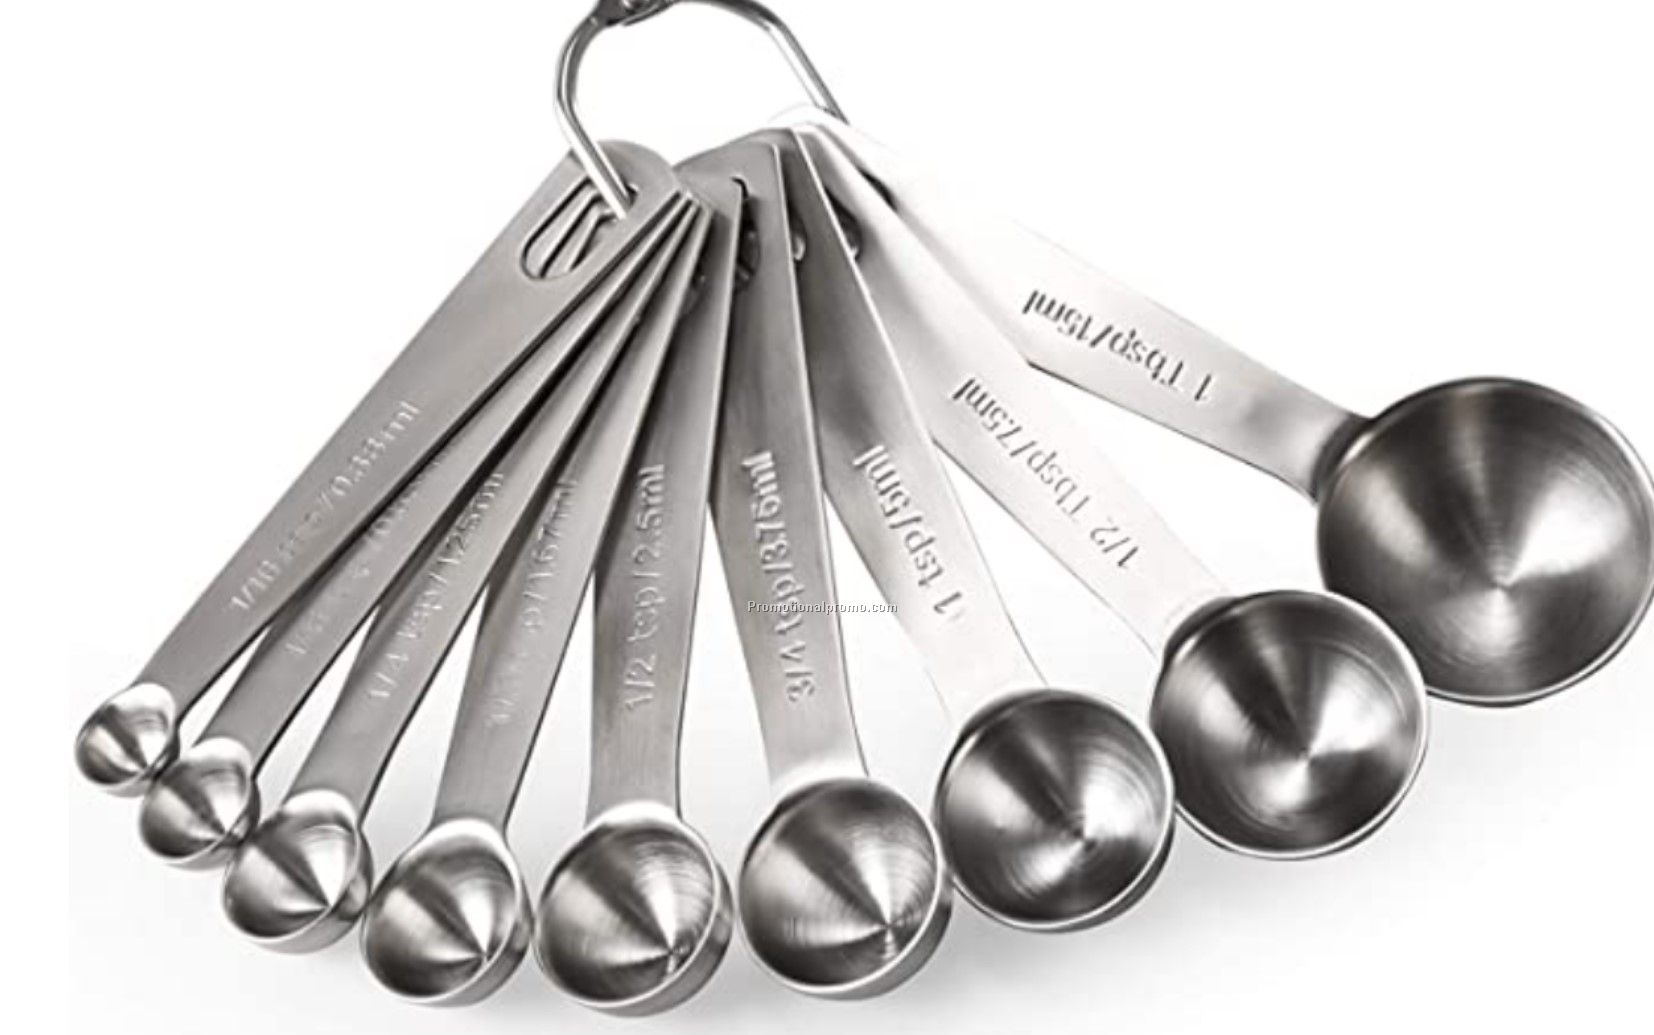 Baking Tools Baking Scale Stainless Steel Measuring Spoon Set High Quality 9 piece Stainless Steel Measuring Spoon